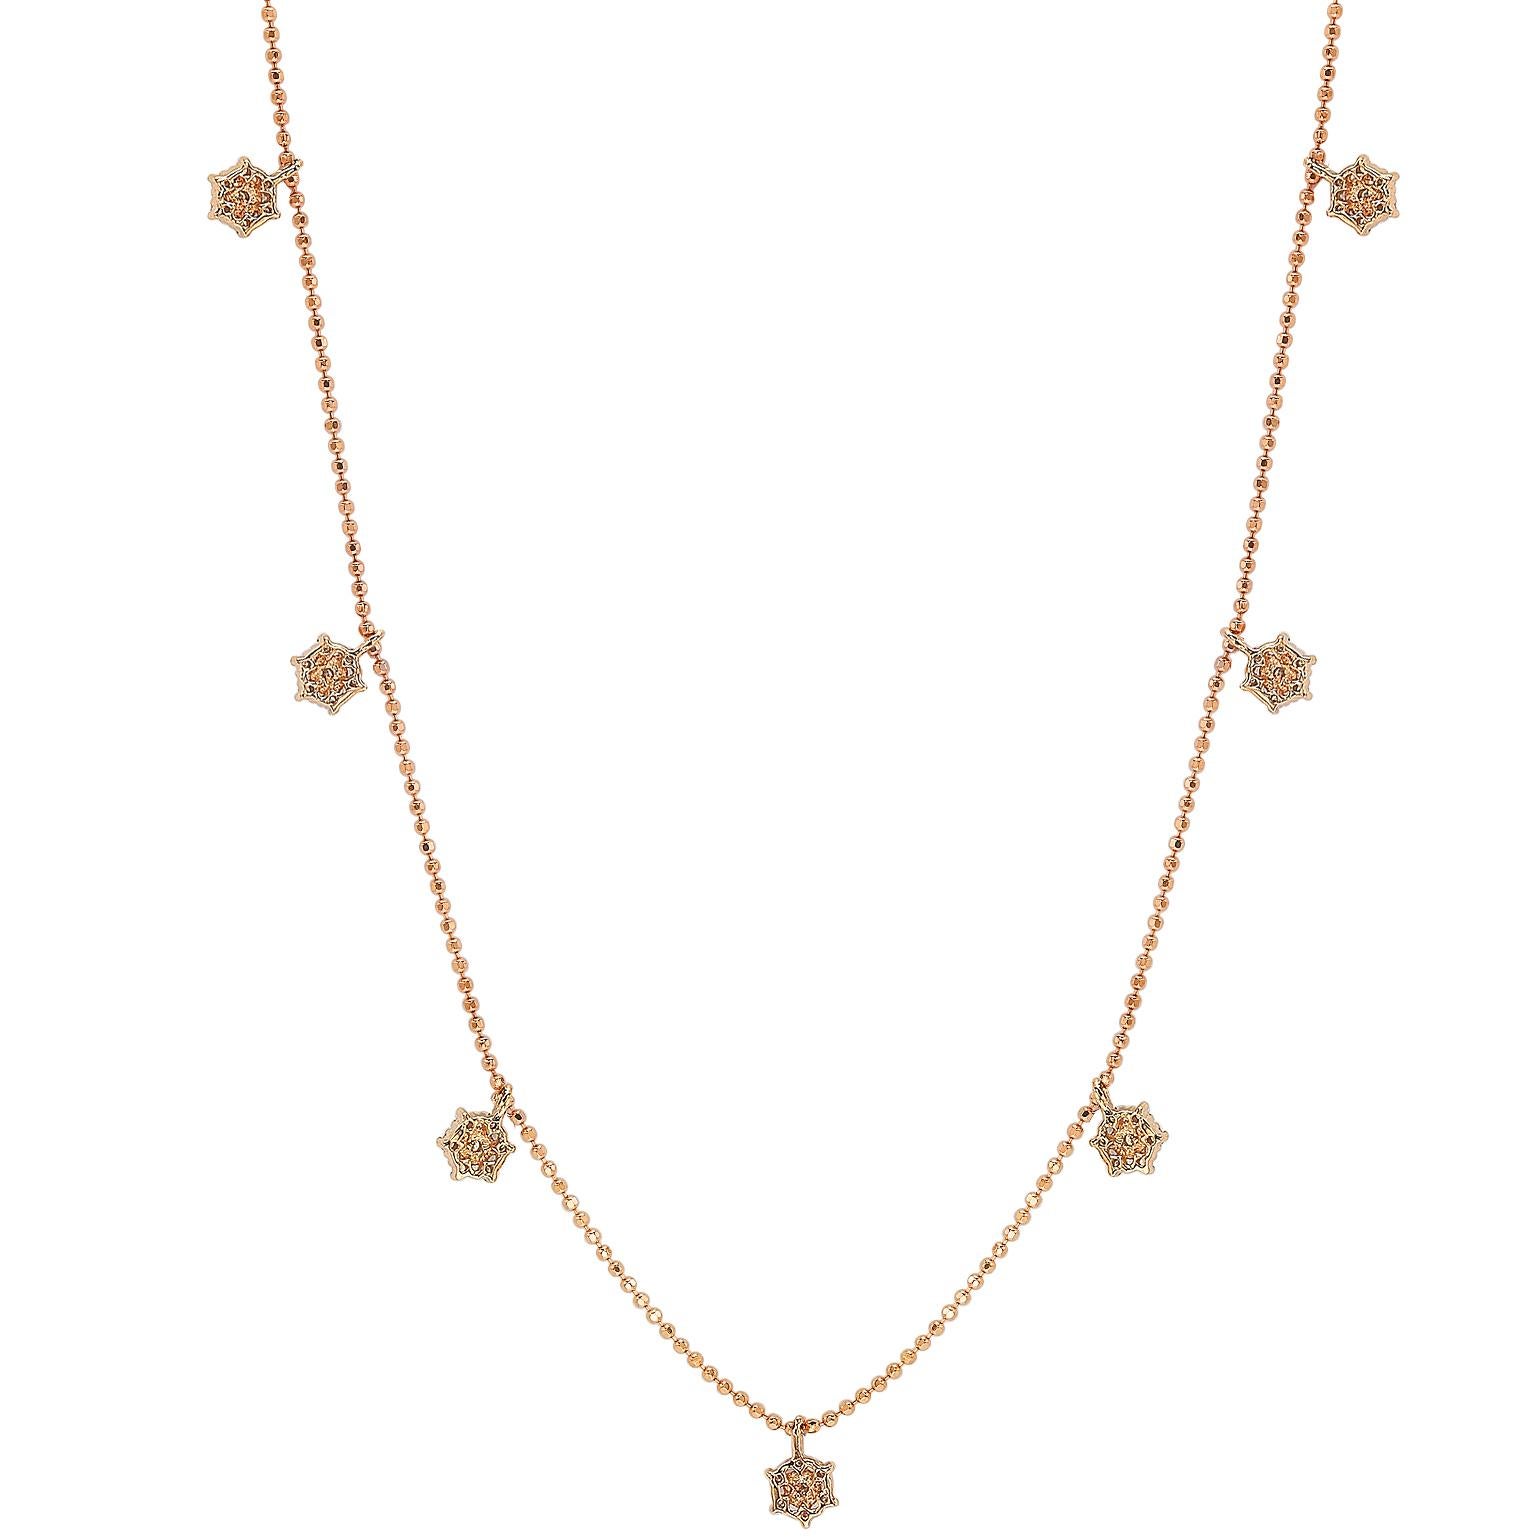 This unique Suzy Levian diamond station flower necklace displays round-cut diamonds on 14 karat rose gold setting. This gorgeous necklace contains 49 white round cut diamonds totaling .30cttw. The necklace has 7 flower, each flower contains 7